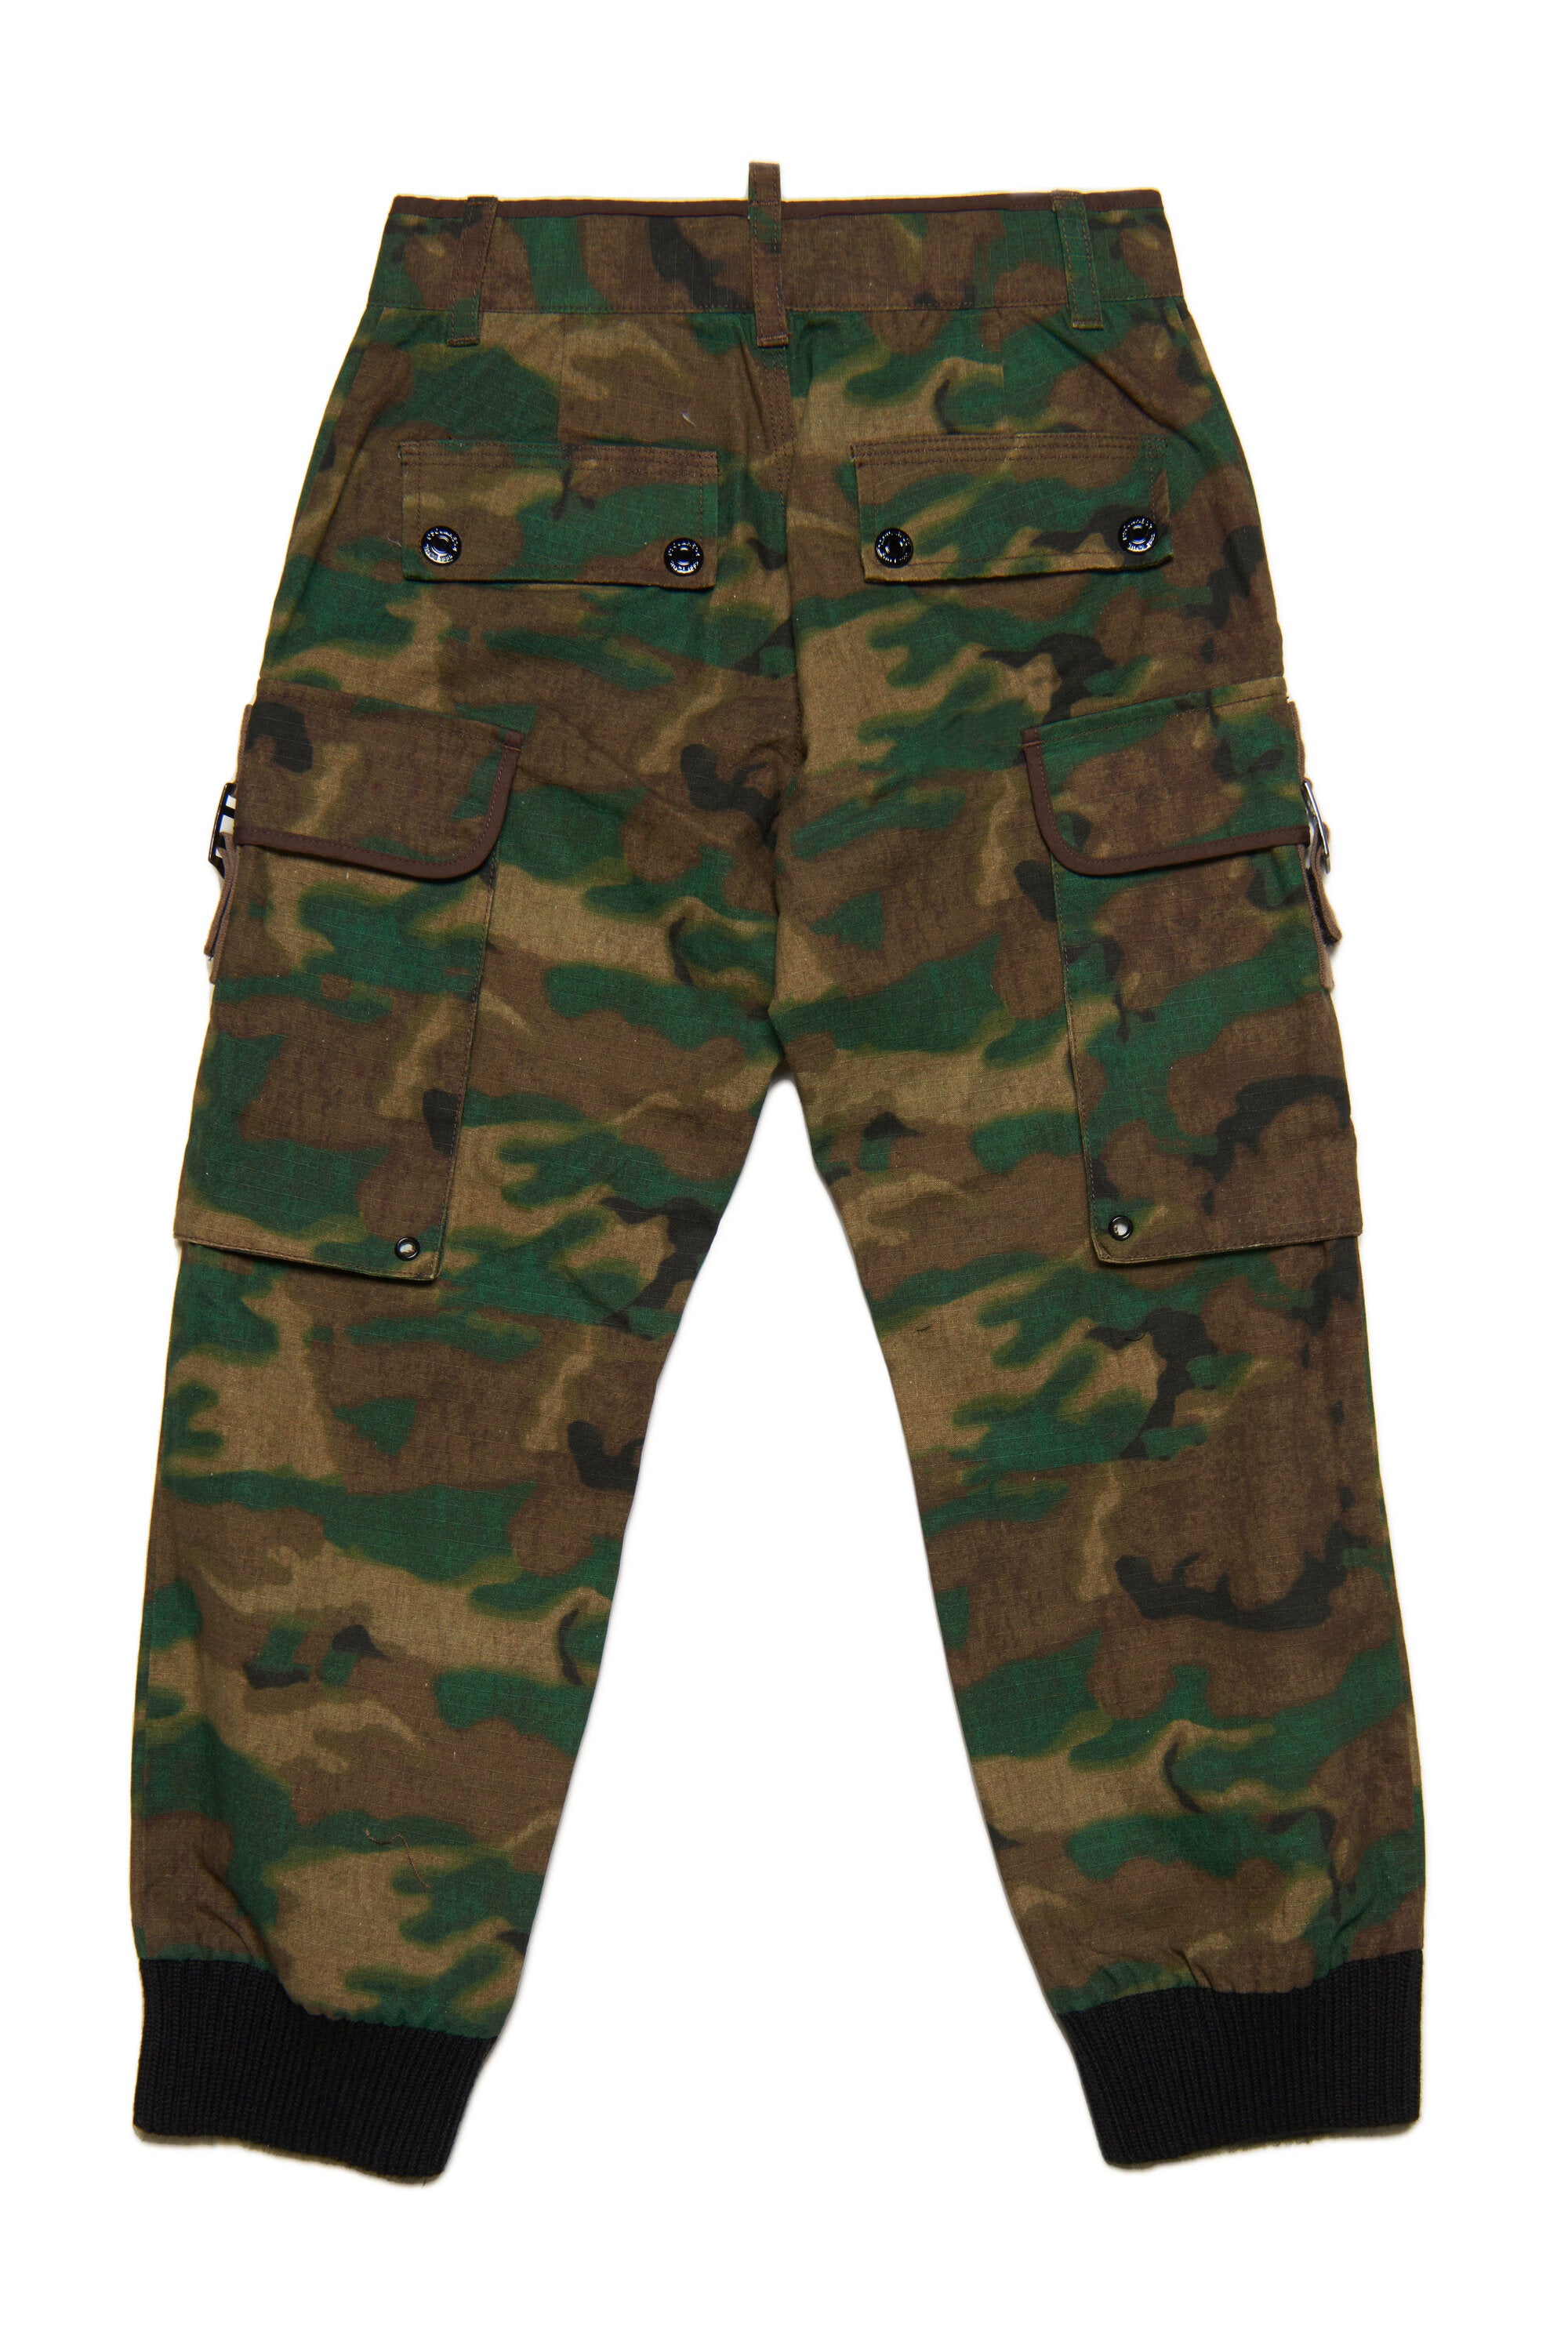 Cotton ripstop allover camouflage cargo pants